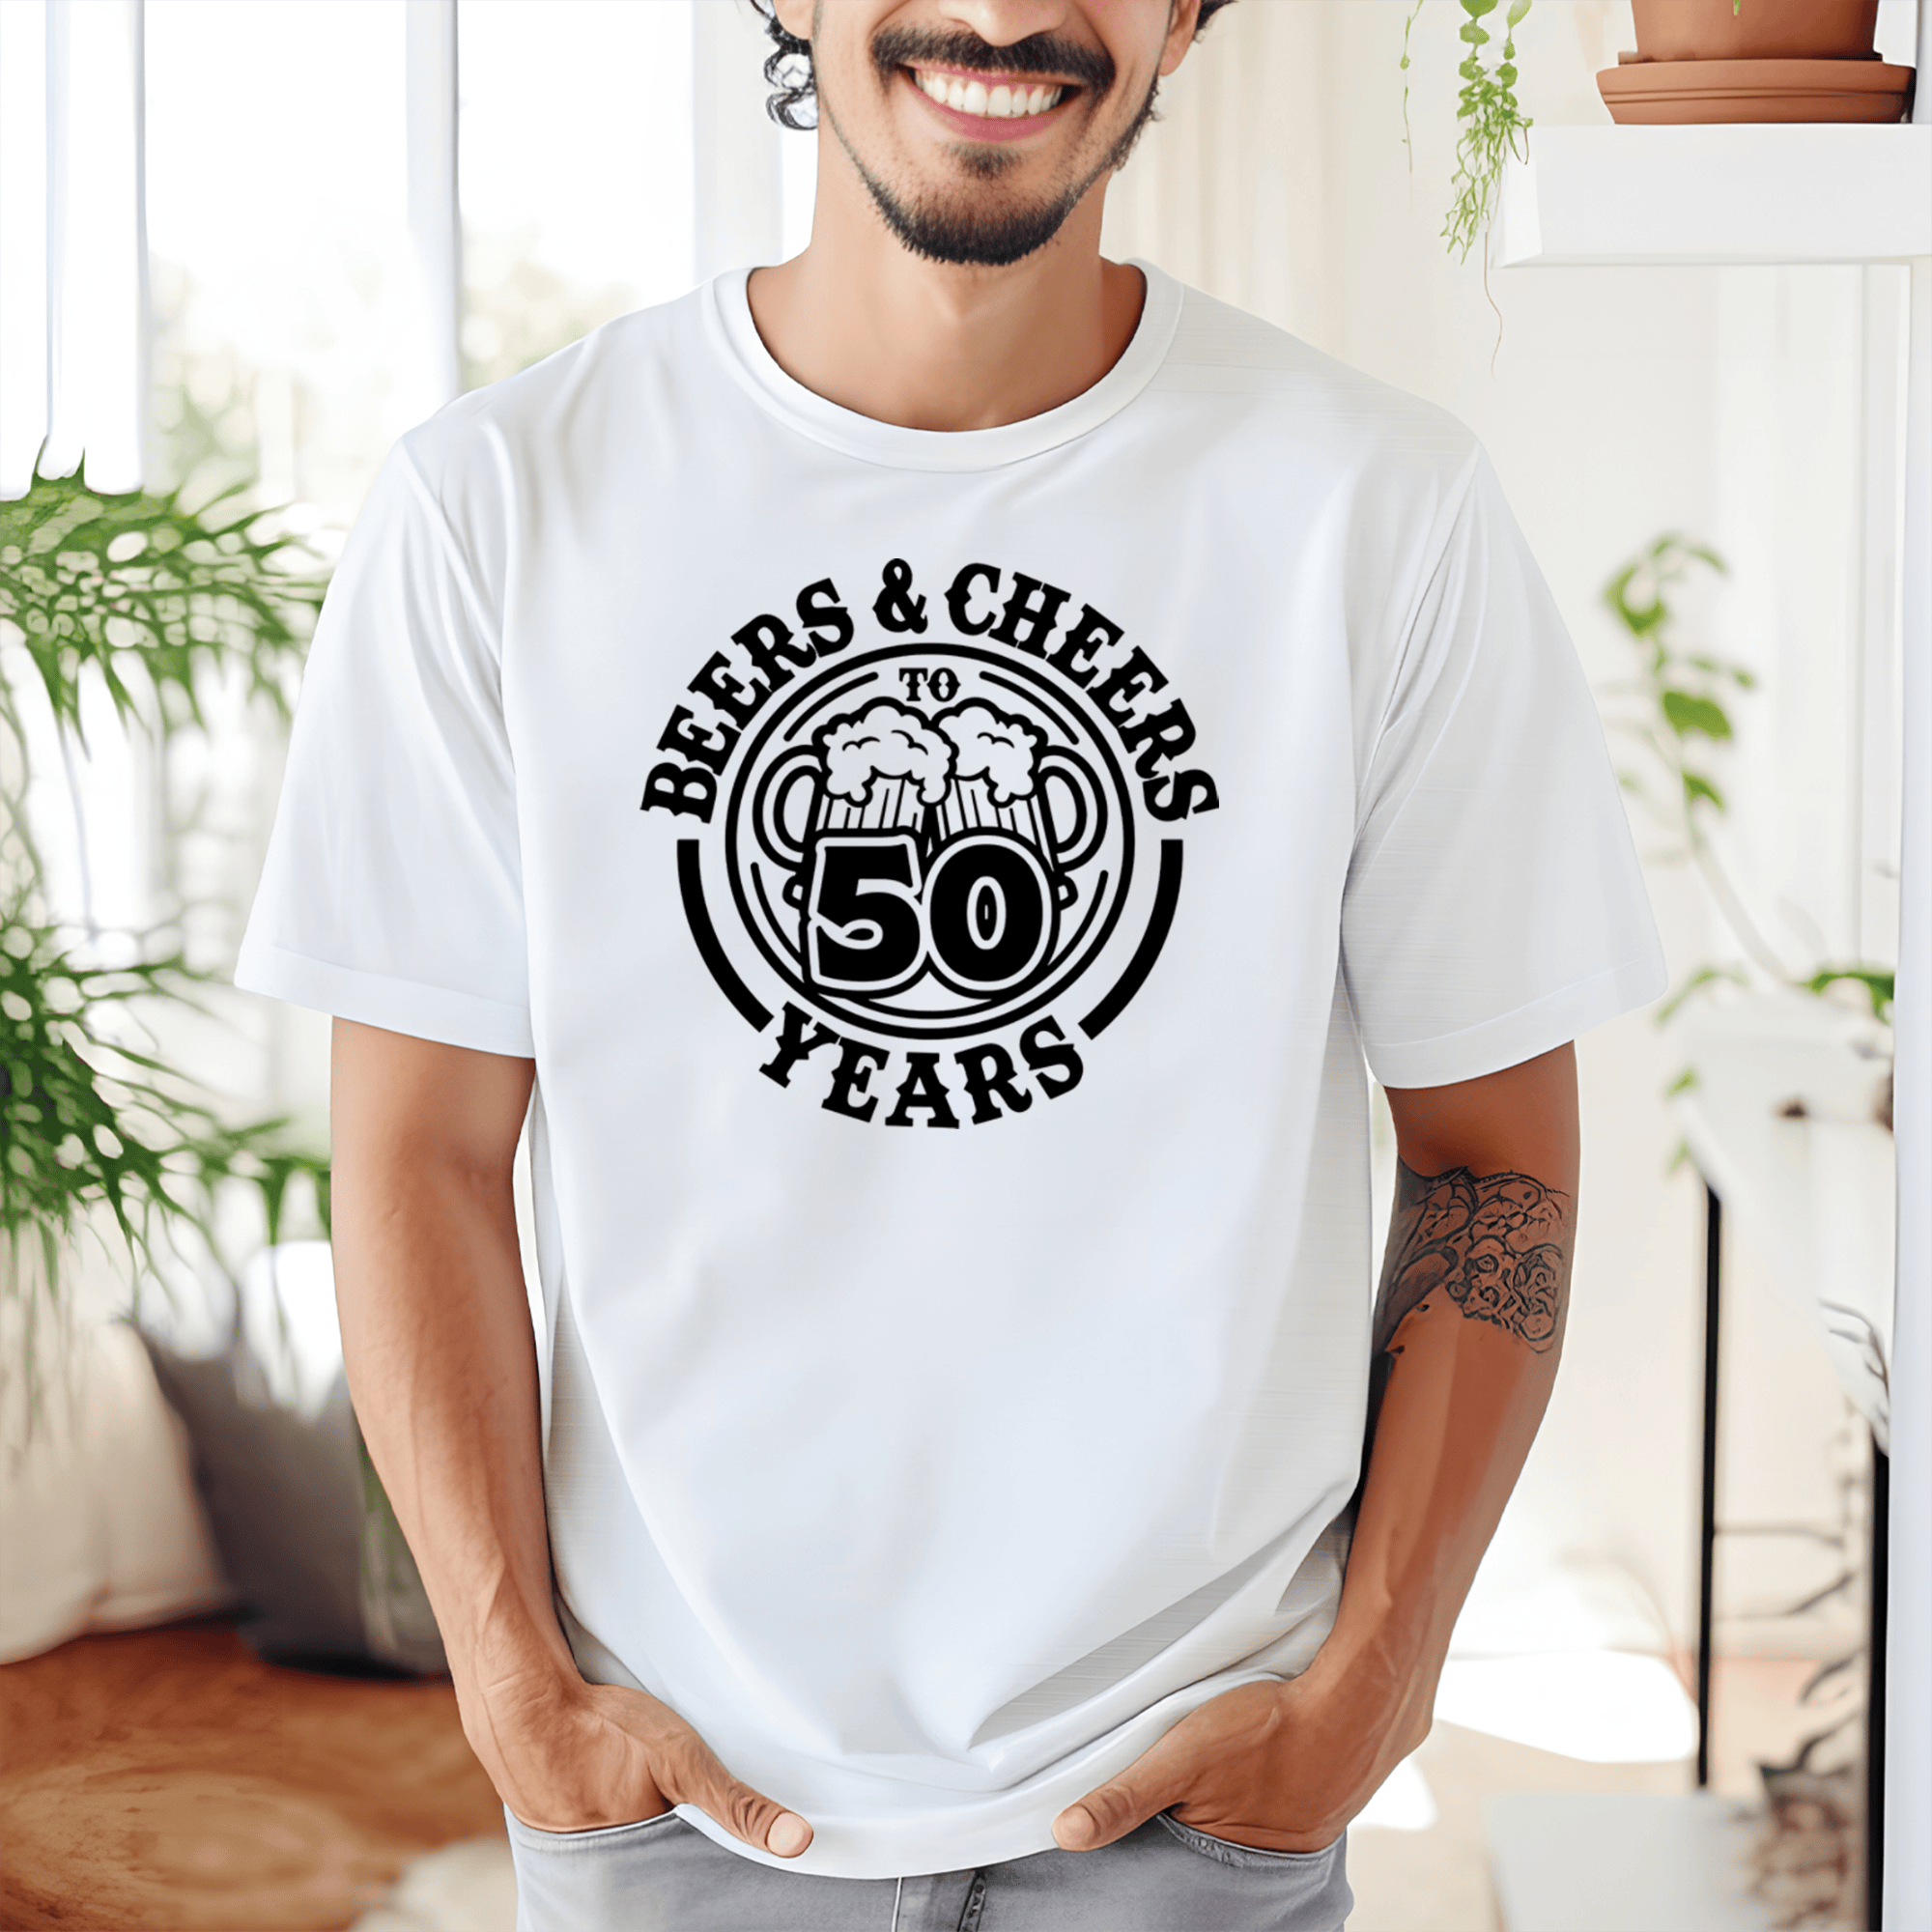 Mens White T Shirt with Beers-N-Cheers-50 design